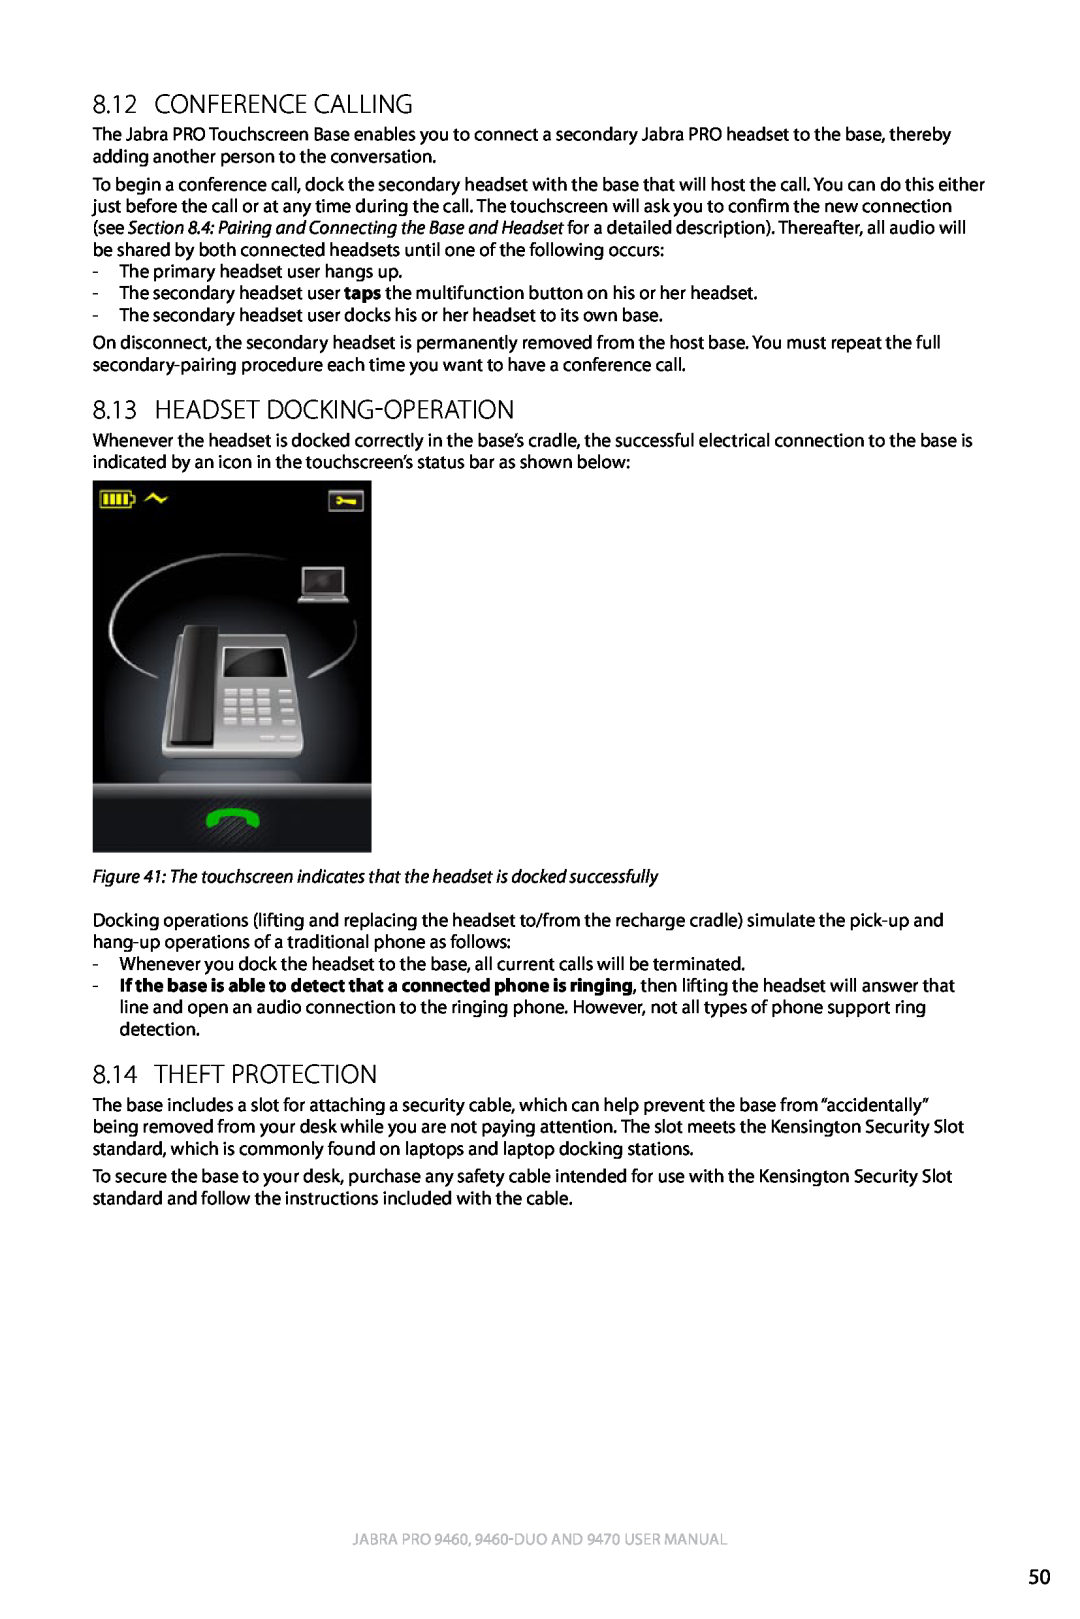 Lennox Hearth 9470 user manual Conference Calling, Headset Docking-Operation, 8.14Theft Protection, english 